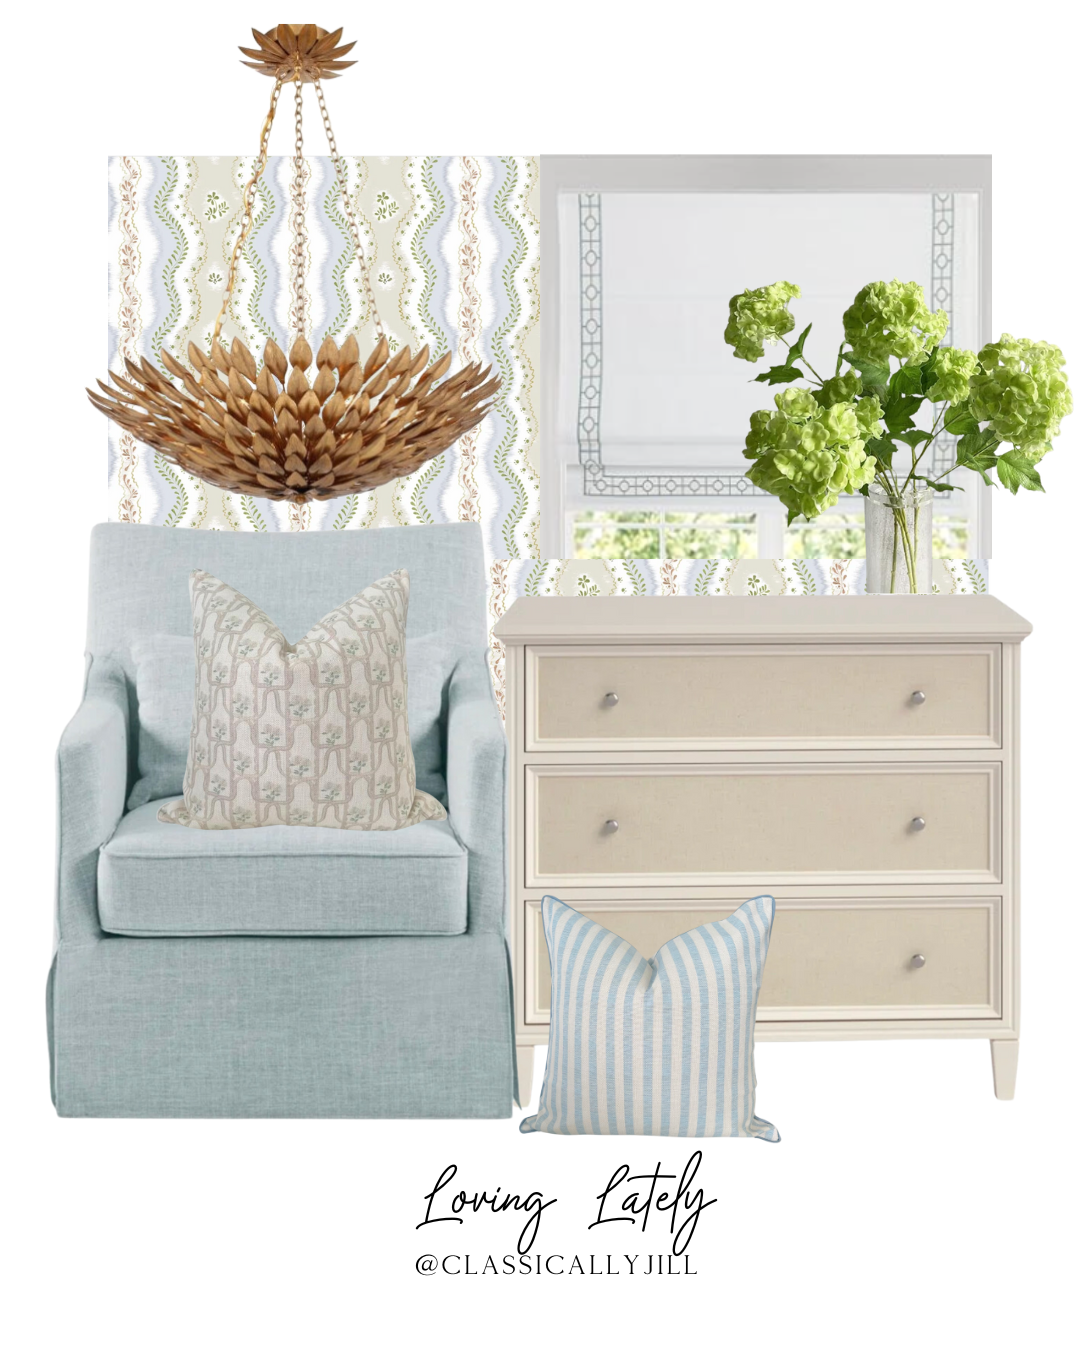 My Latest Room Designs – Styling a Dining Room, Nursery, and Bedroom with the Harvey and Millie Jillien Harbor Pillows